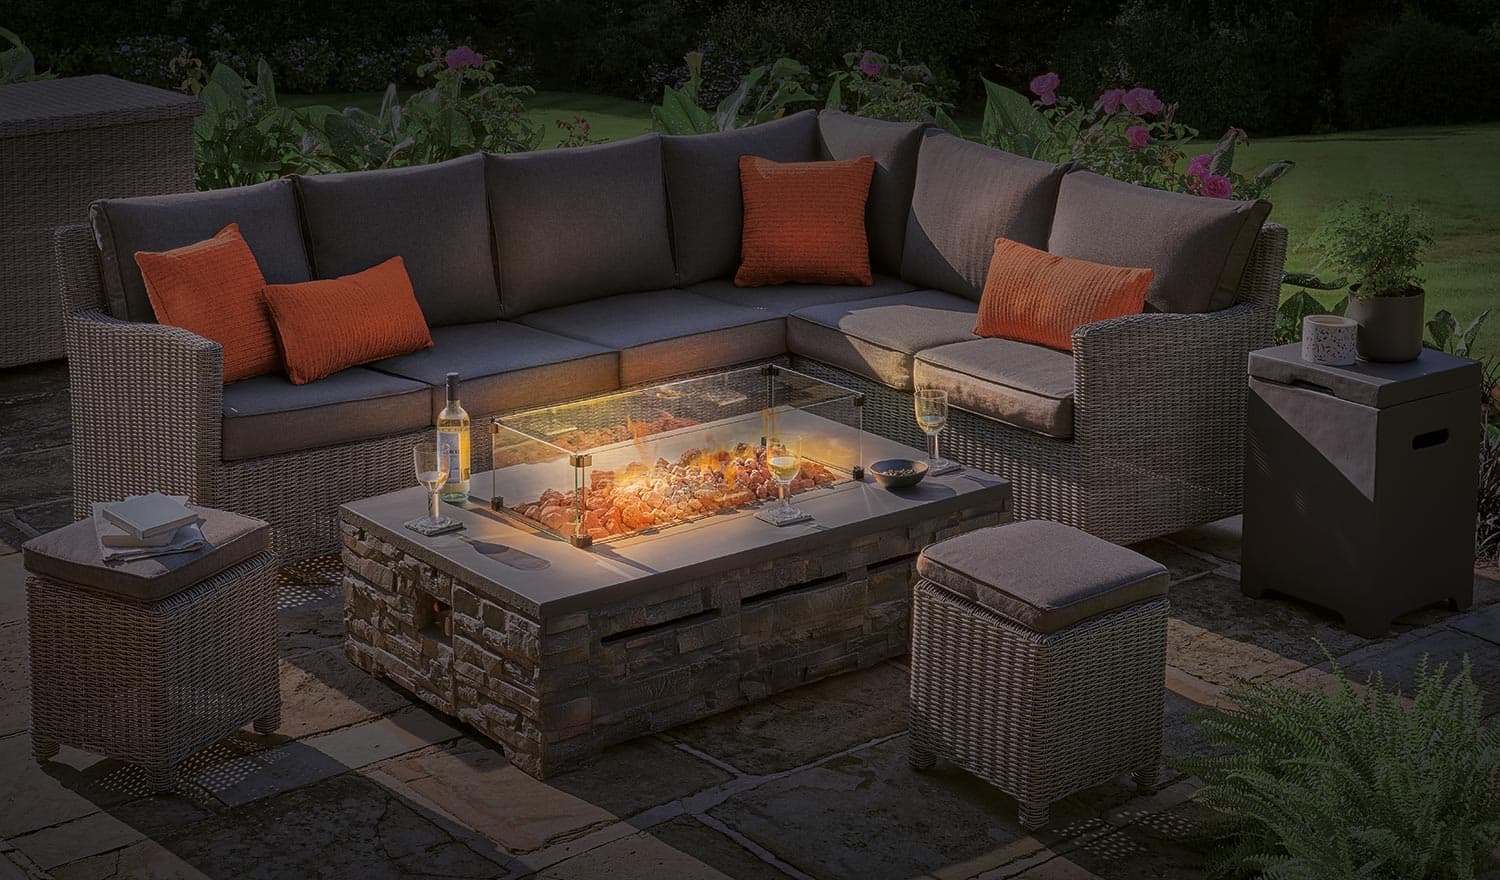 Stone Fire Pit Coffee Table 132 X 85cm, Outdoor Furniture With Fire Pit Coffee Table